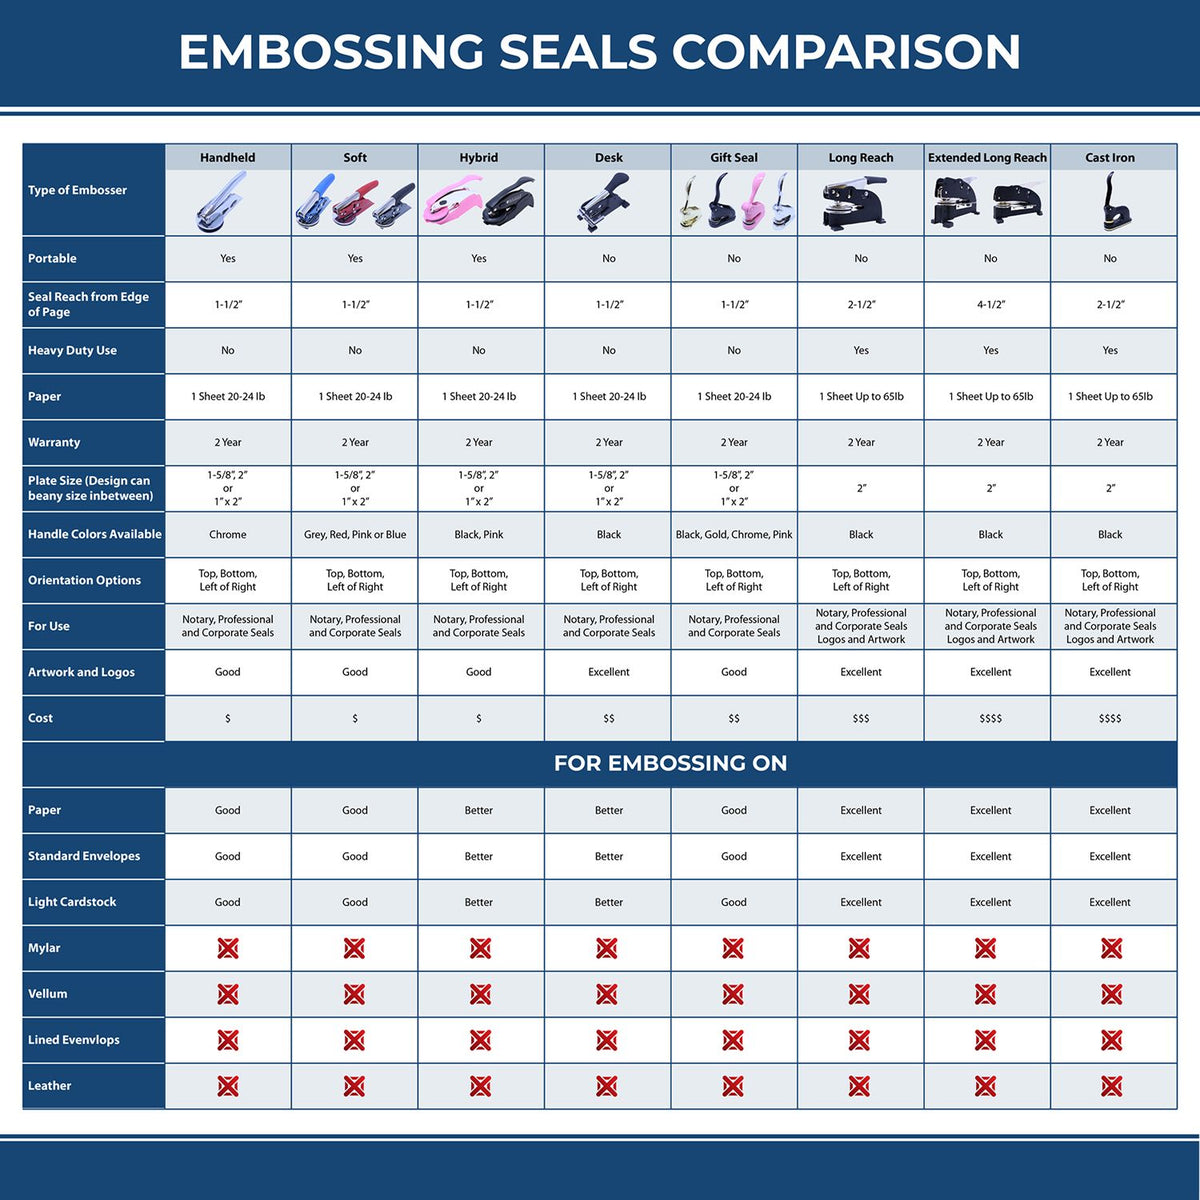 A comparison chart for the different types of mount models available for the Handheld South Carolina Professional Geologist Embosser